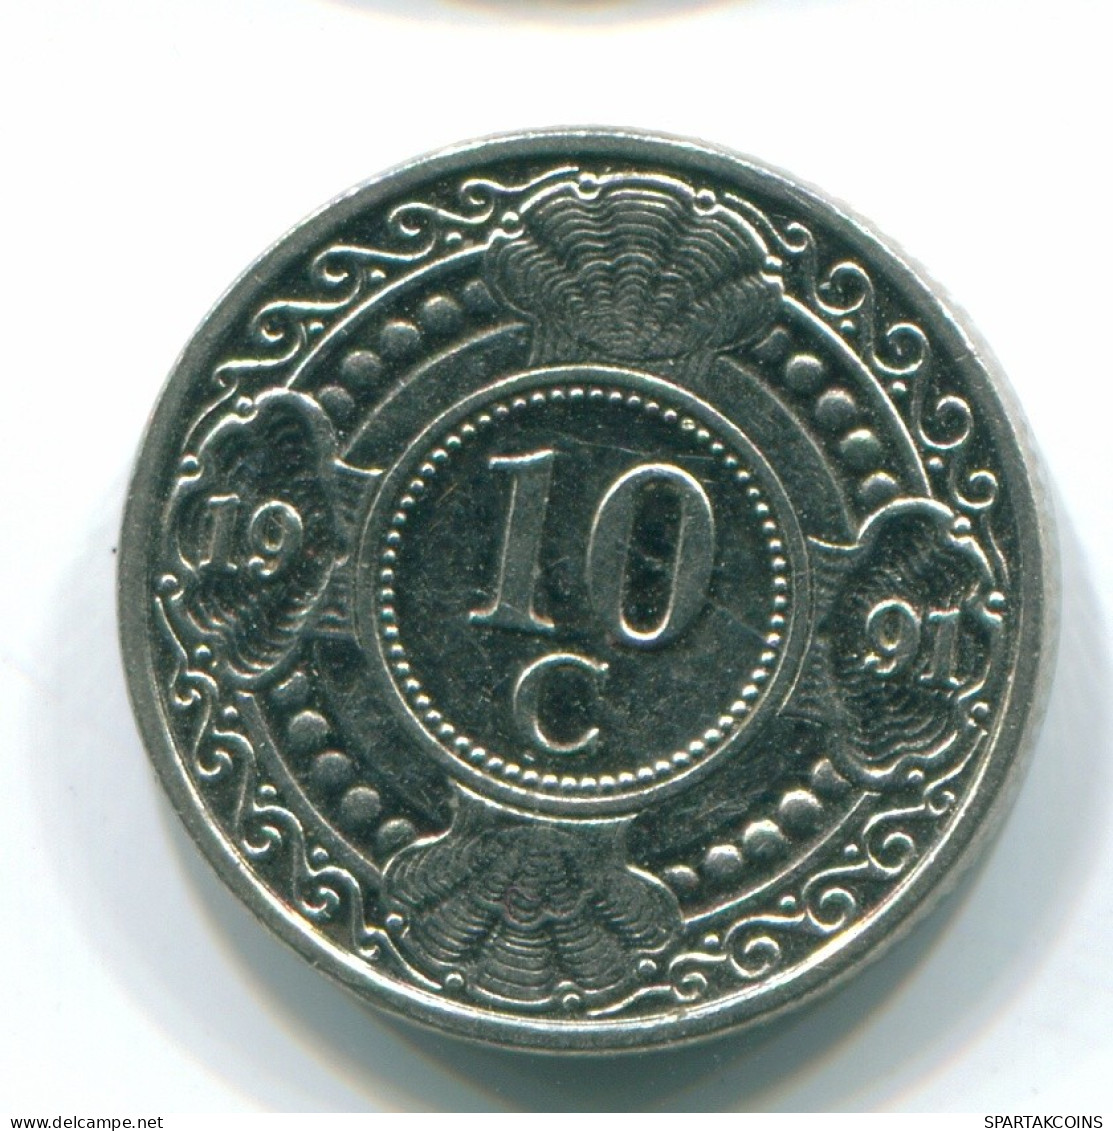 10 CENTS 1991 NETHERLANDS ANTILLES Nickel Colonial Coin #S11336.U.A - Netherlands Antilles